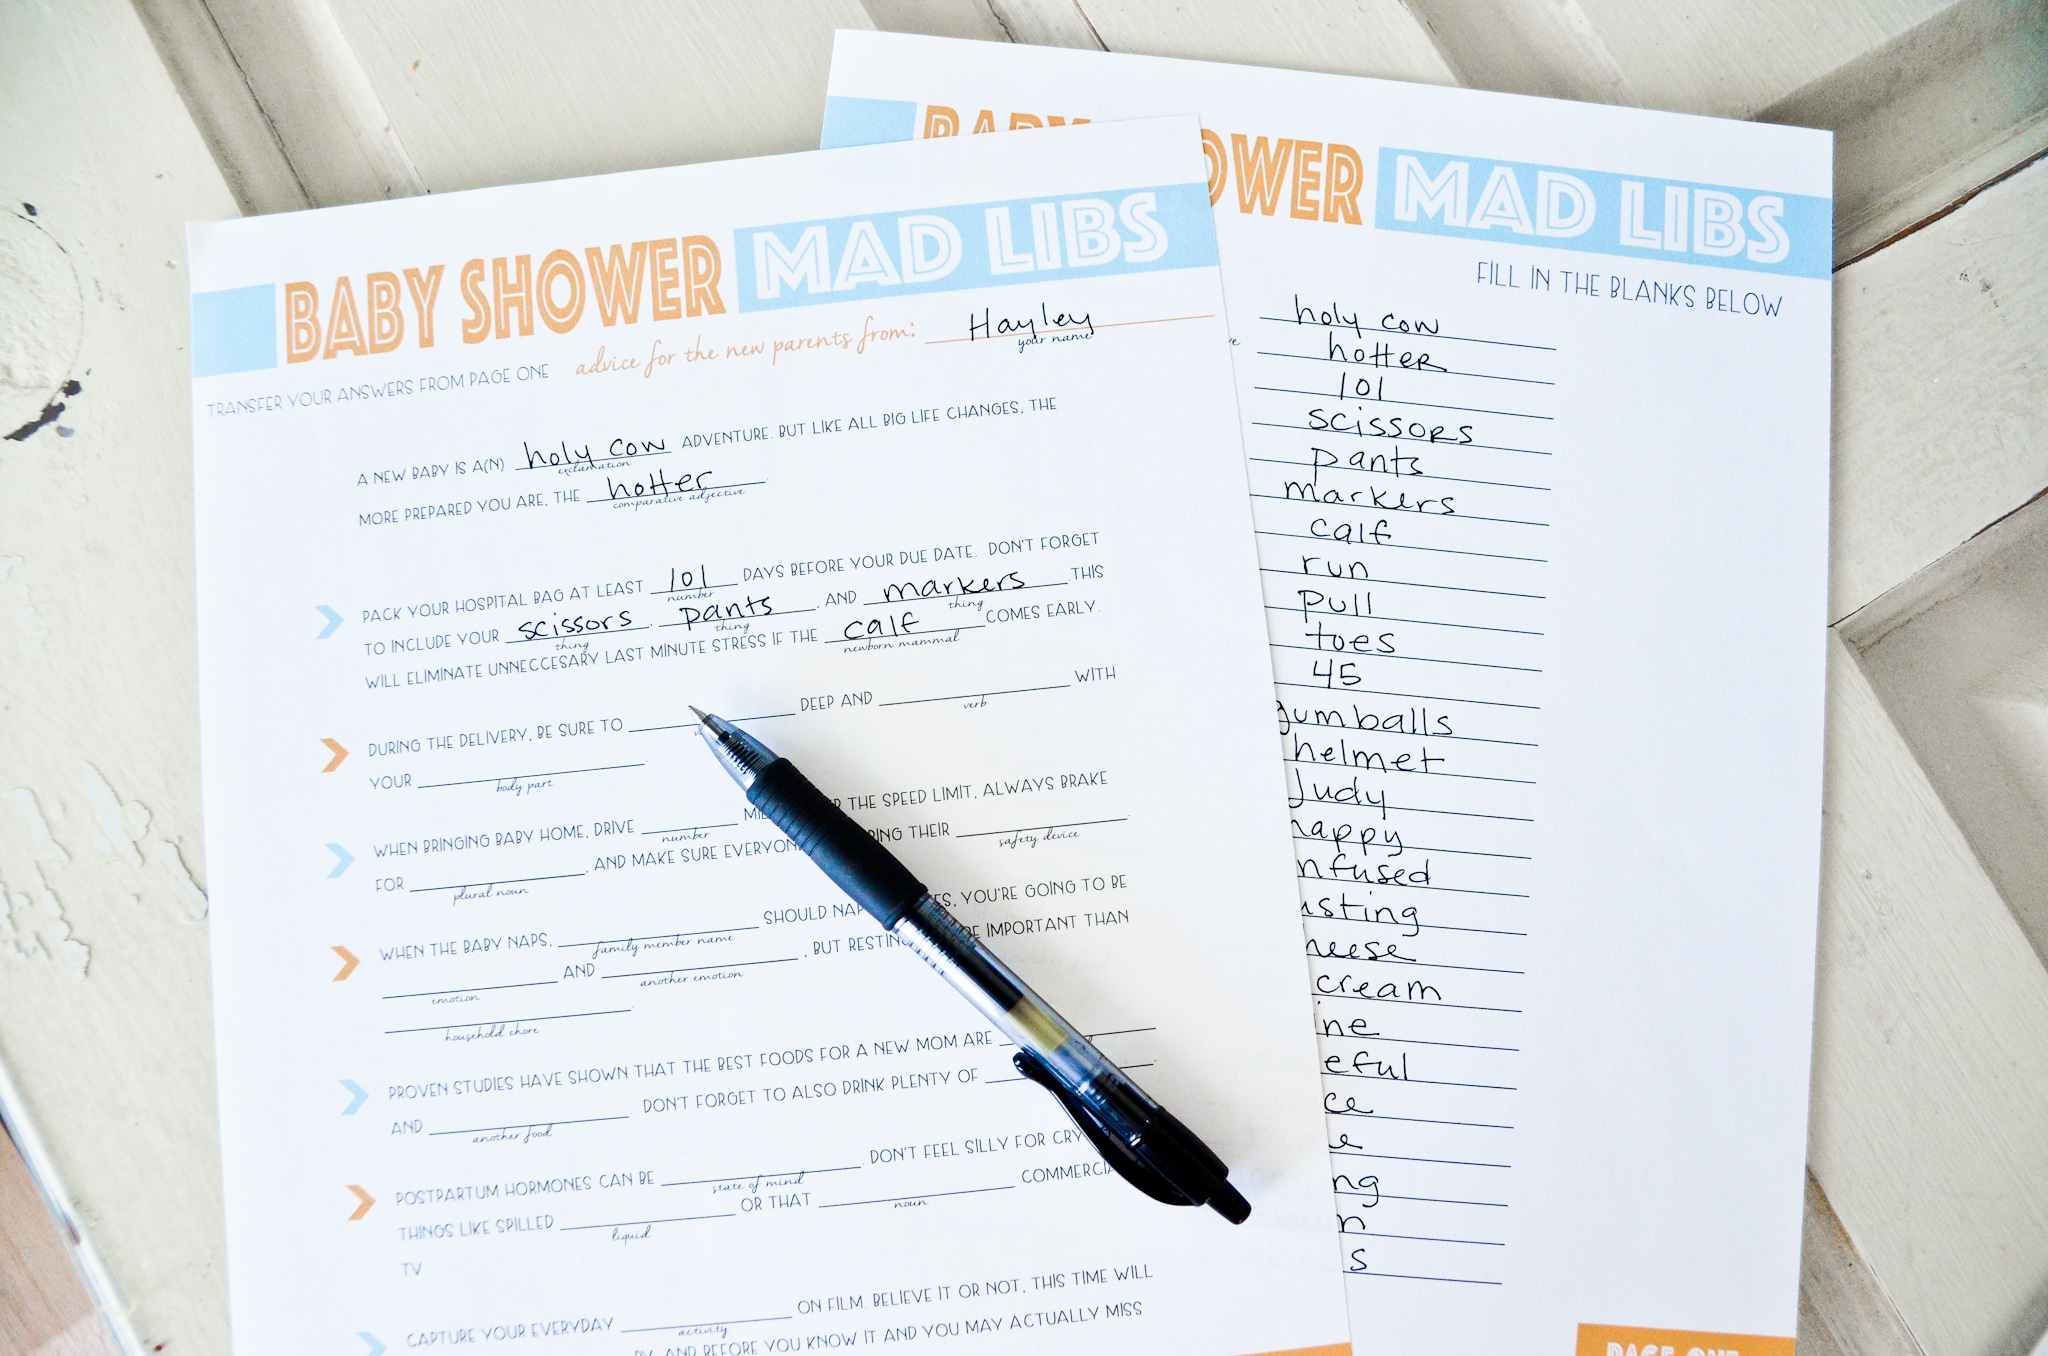 Free Printable Baby Shower Mad Libs - Project Nursery